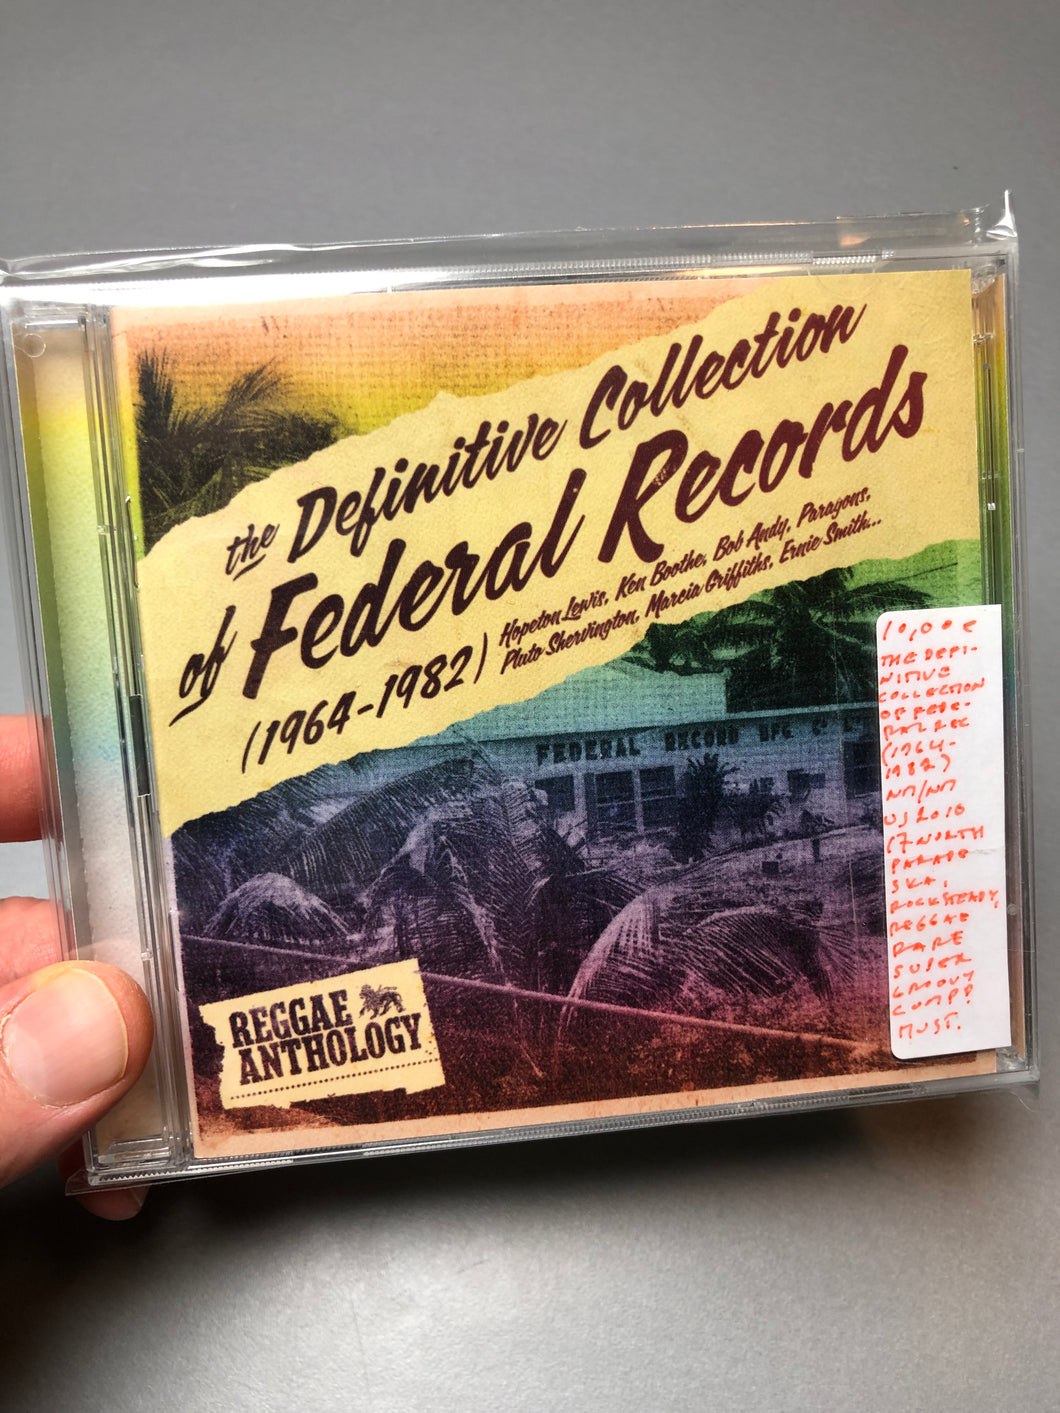 The Definitive Collection Of Federal Records (1964-1982)